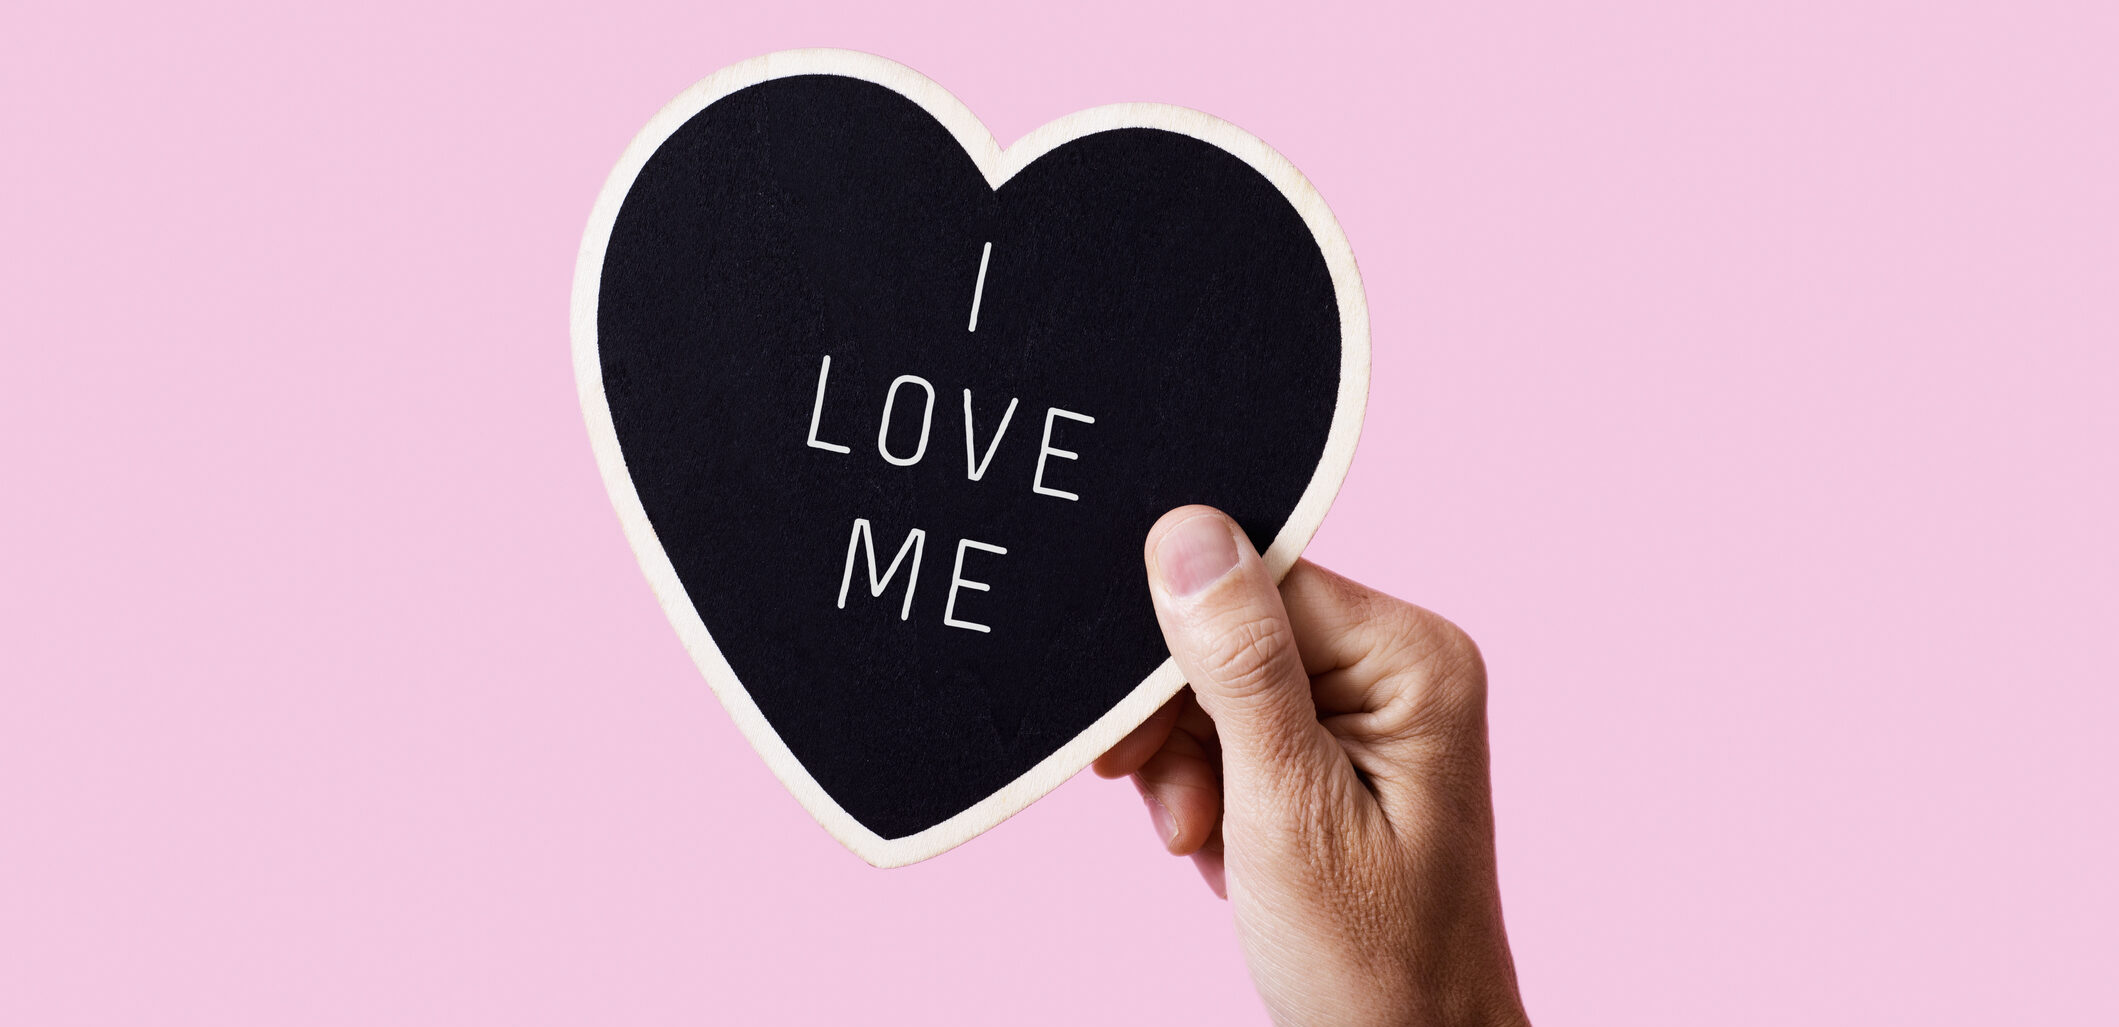 How Counselling Can Help With Self-Love and Self-Worth